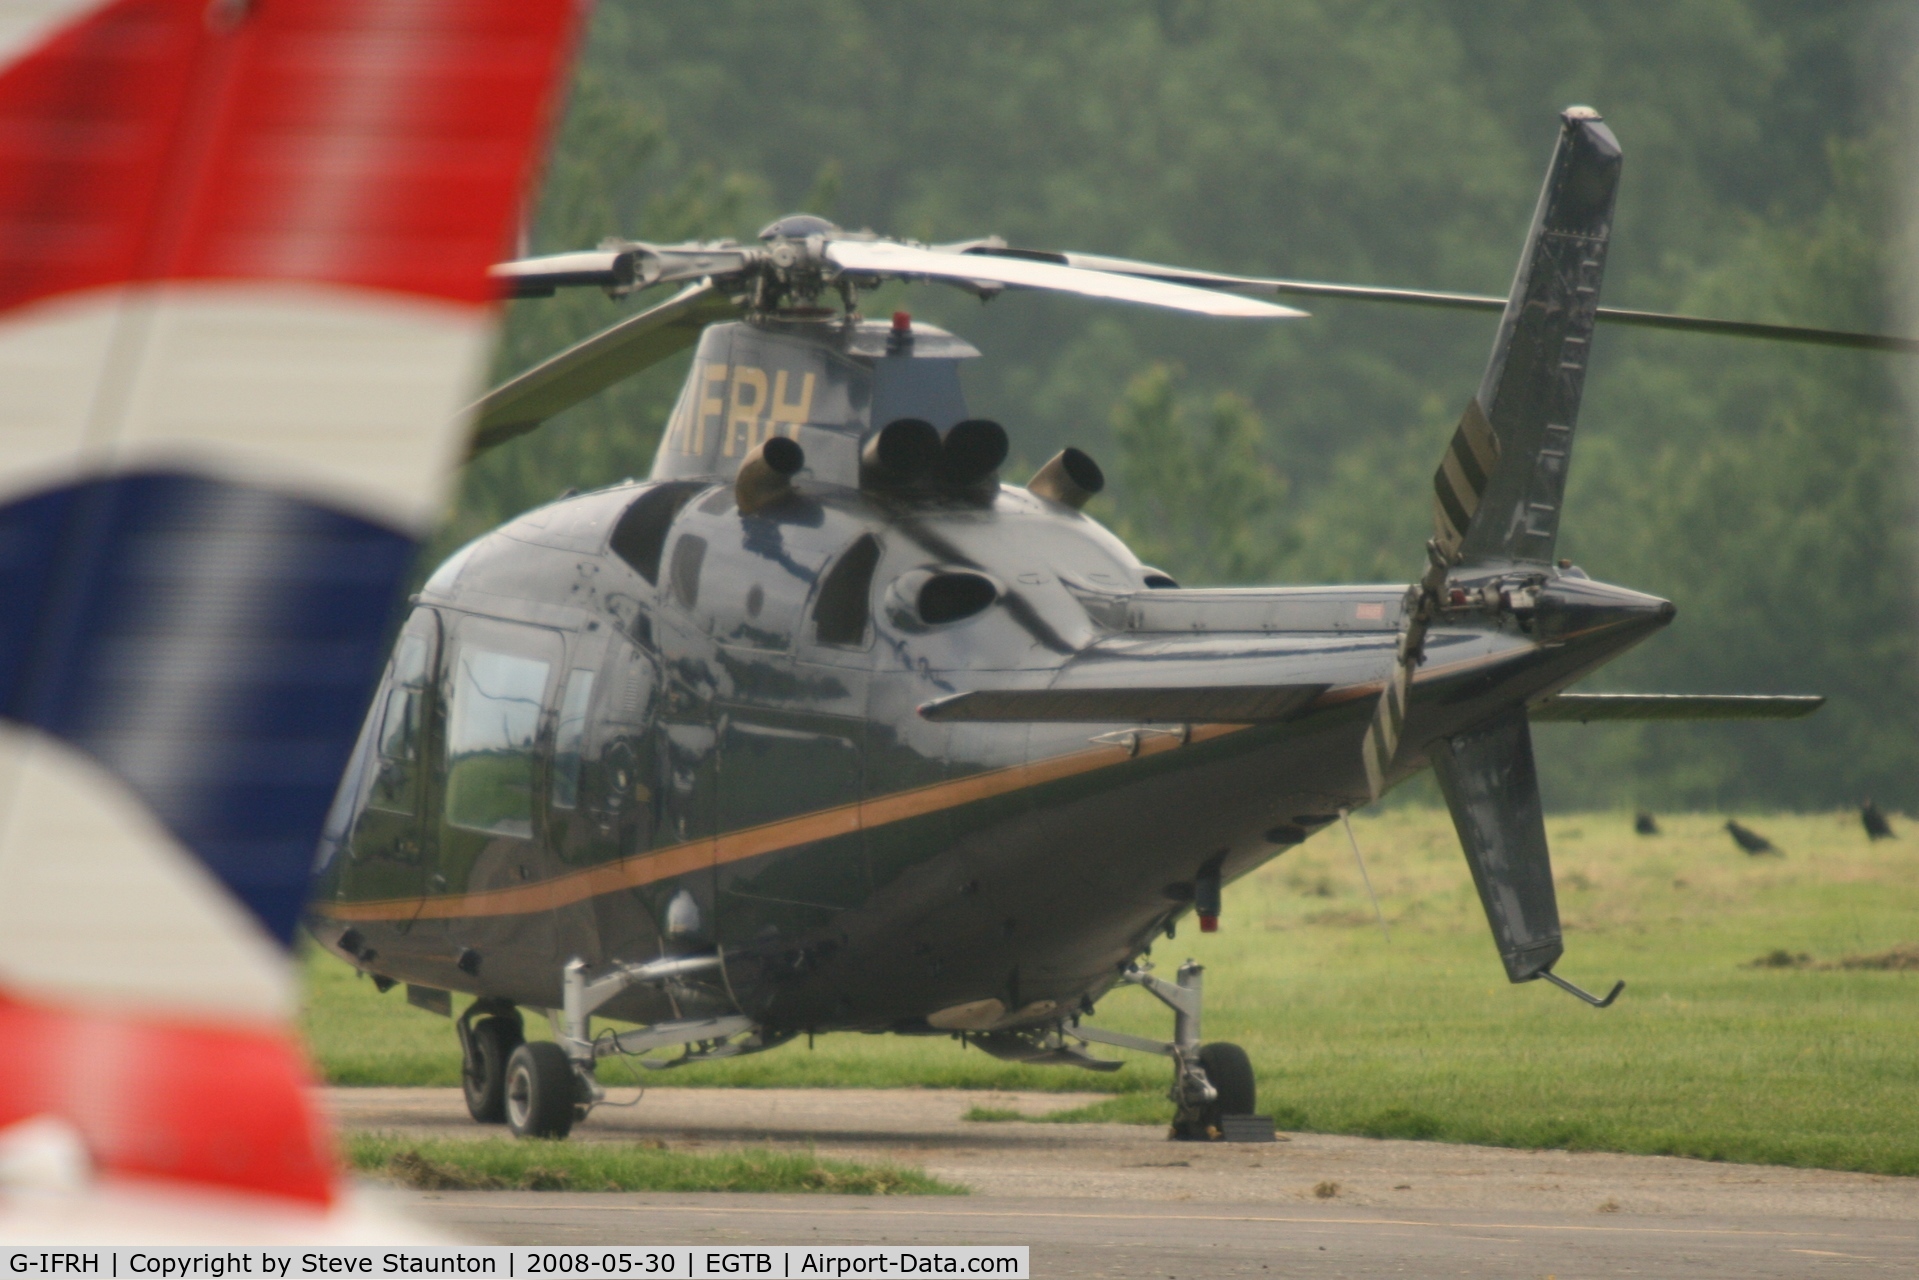 G-IFRH, 1990 Agusta A-109C C/N 7619, Taken at Wycombe Air Park using my new Sigma 50 to 500 APO DG HSM lens (The Beast)